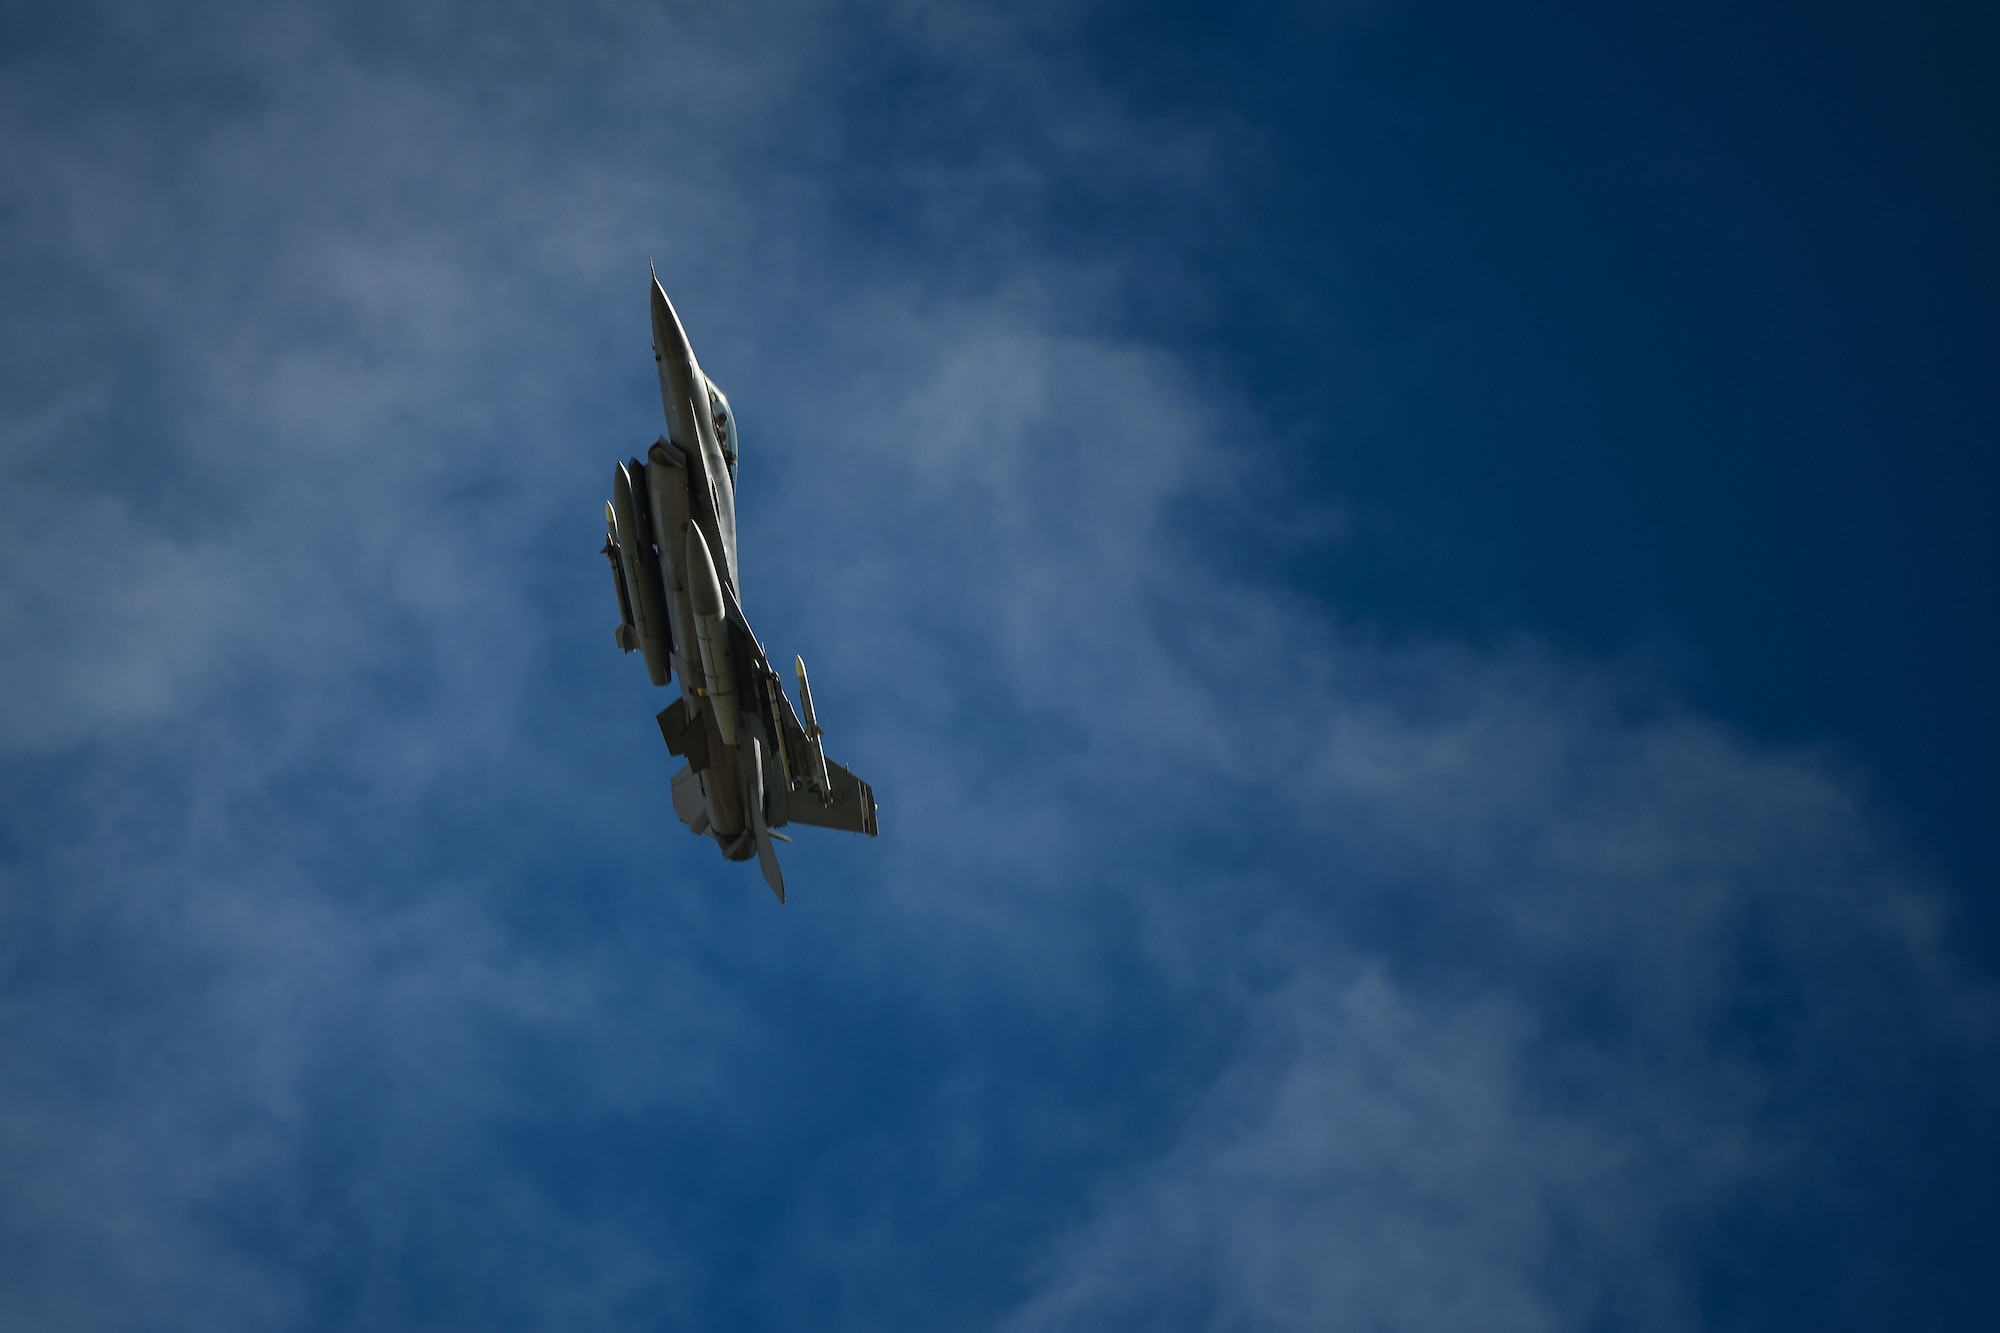 A U.S. Air Force F-16 Fighting Falcon assigned to the 510th Fighter Squadron soars above Amendola Air Base, Italy, during an Agile Combat Employment exercise, Feb. 16, 2021. During the exercise, the 555th and 510th Fighter Squadron executed counter air training with Italian air force F-35 Lightning II. (U.S. Air Force photo by Senior Airman Ericka A. Woolever)